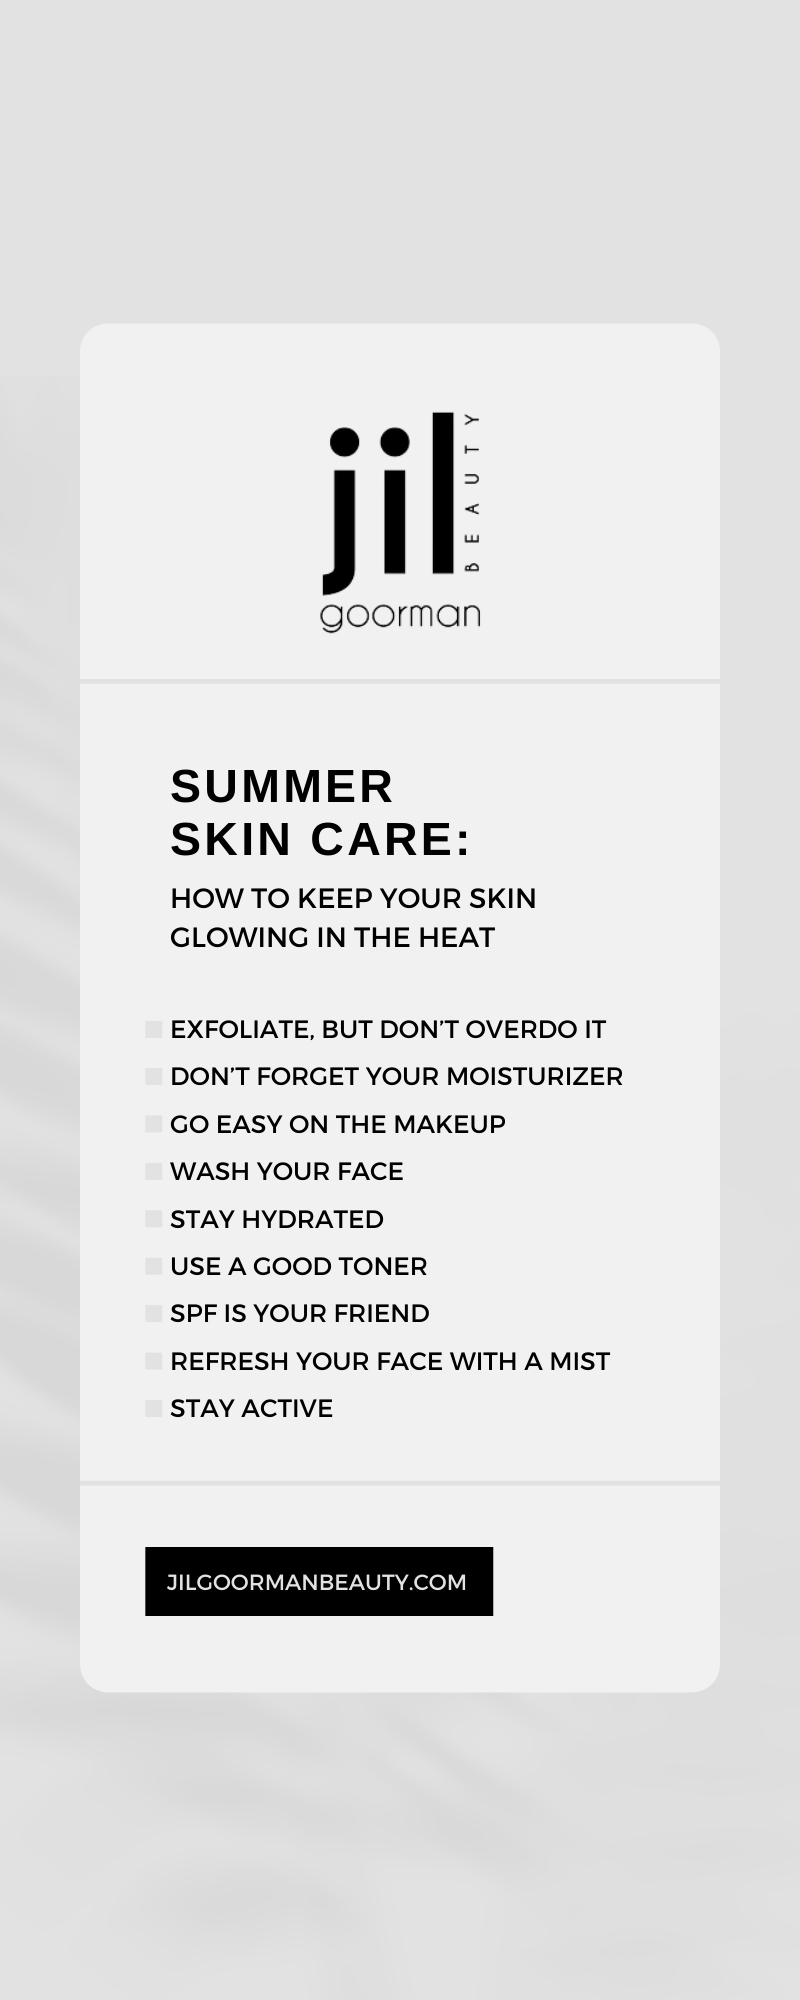 Summer Skin Care: How To Keep Your Skin Glowing in the Heat